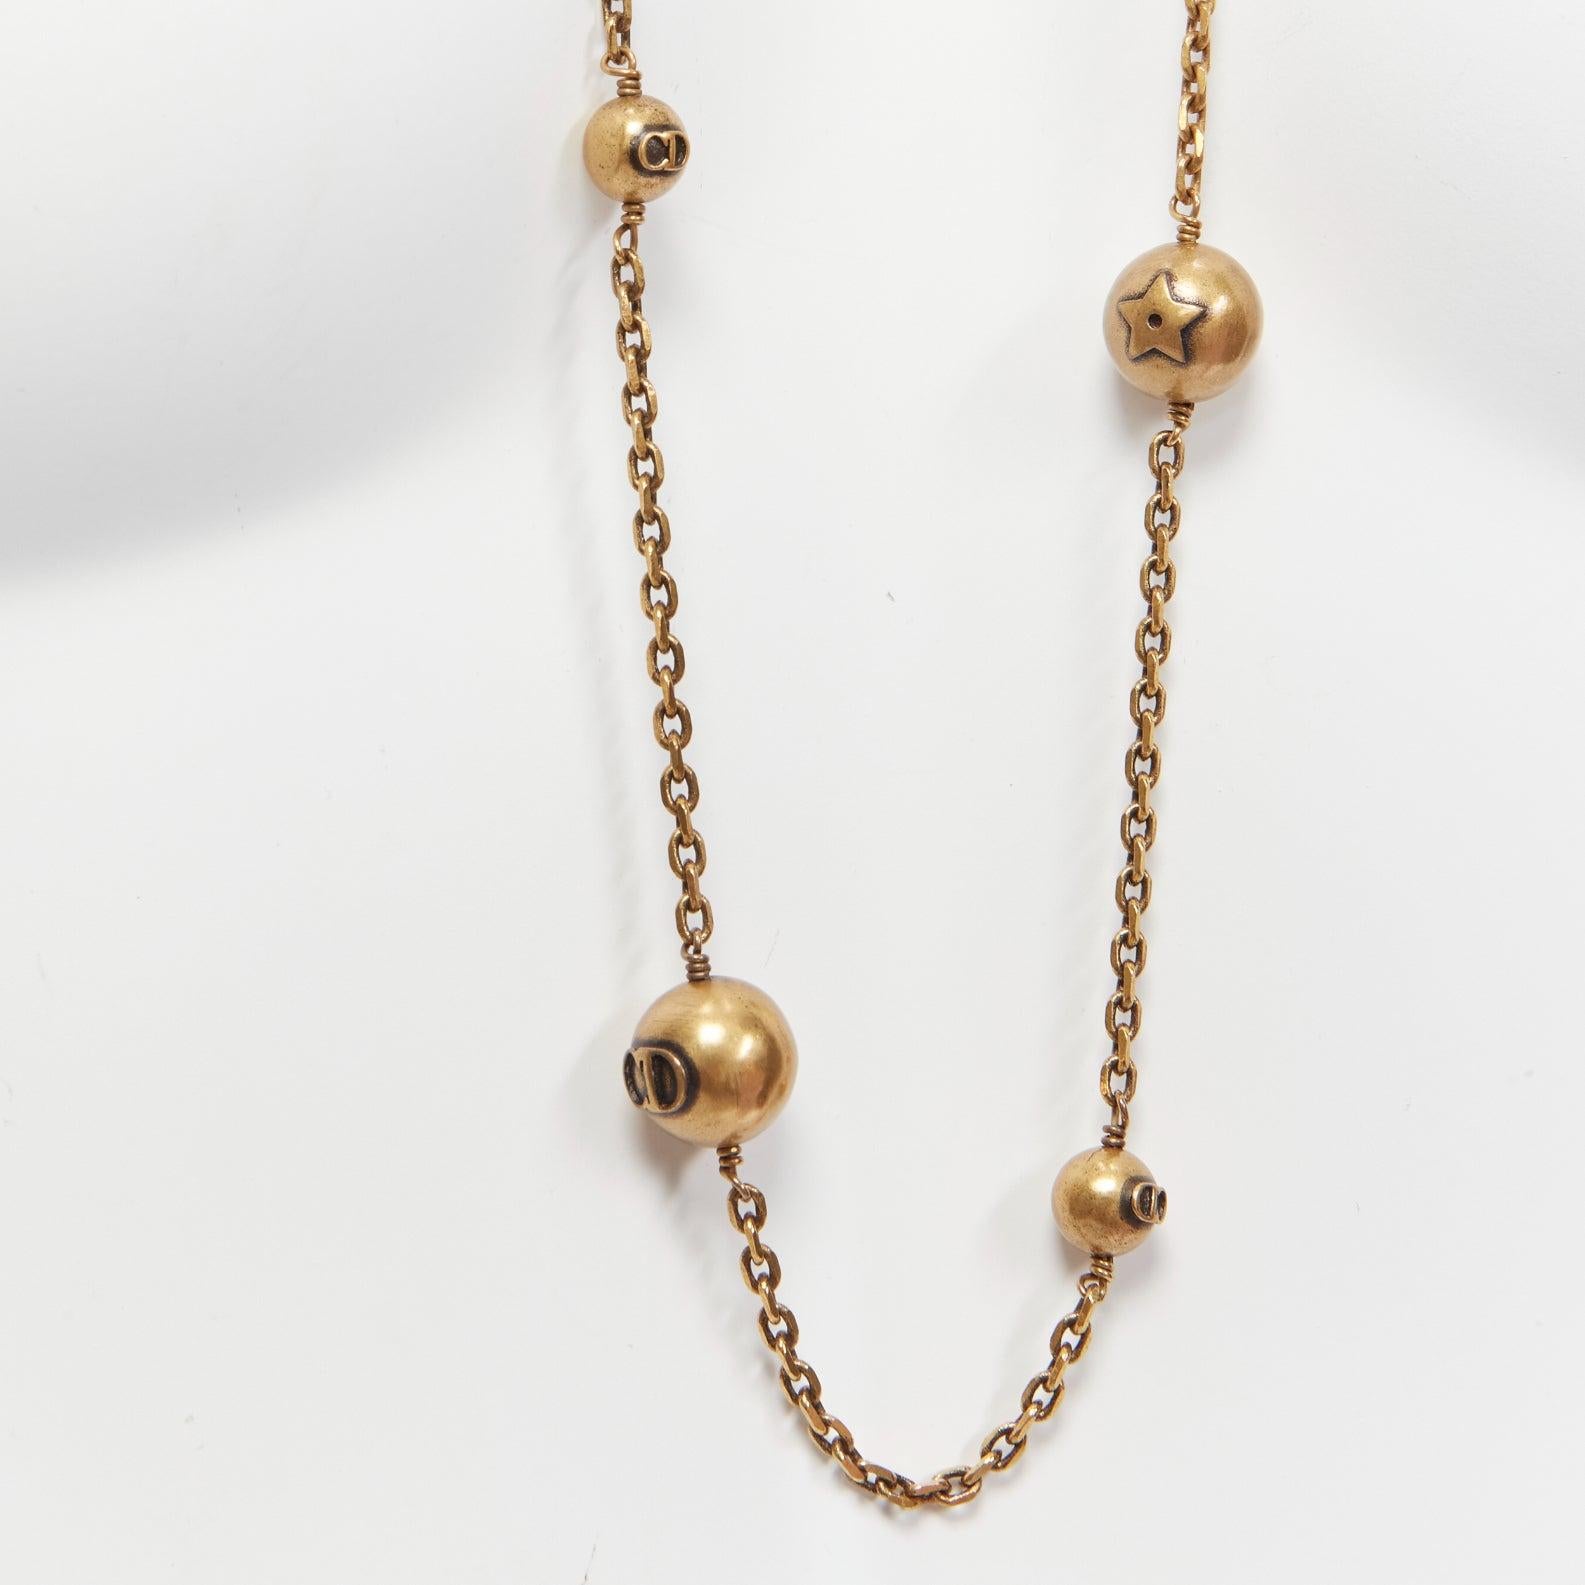 CHRISTIAN DIOR J'Adior 4 leaf clover bee ball charms bronze long necklace
Reference: TGAS/D00698
Brand: Christian Dior
Designer: Maria Grazia Chiuri
Material: Metal
Color: Bronze
Pattern: Solid
Closure: Loop Through
Lining: Bronze Metal
Extra